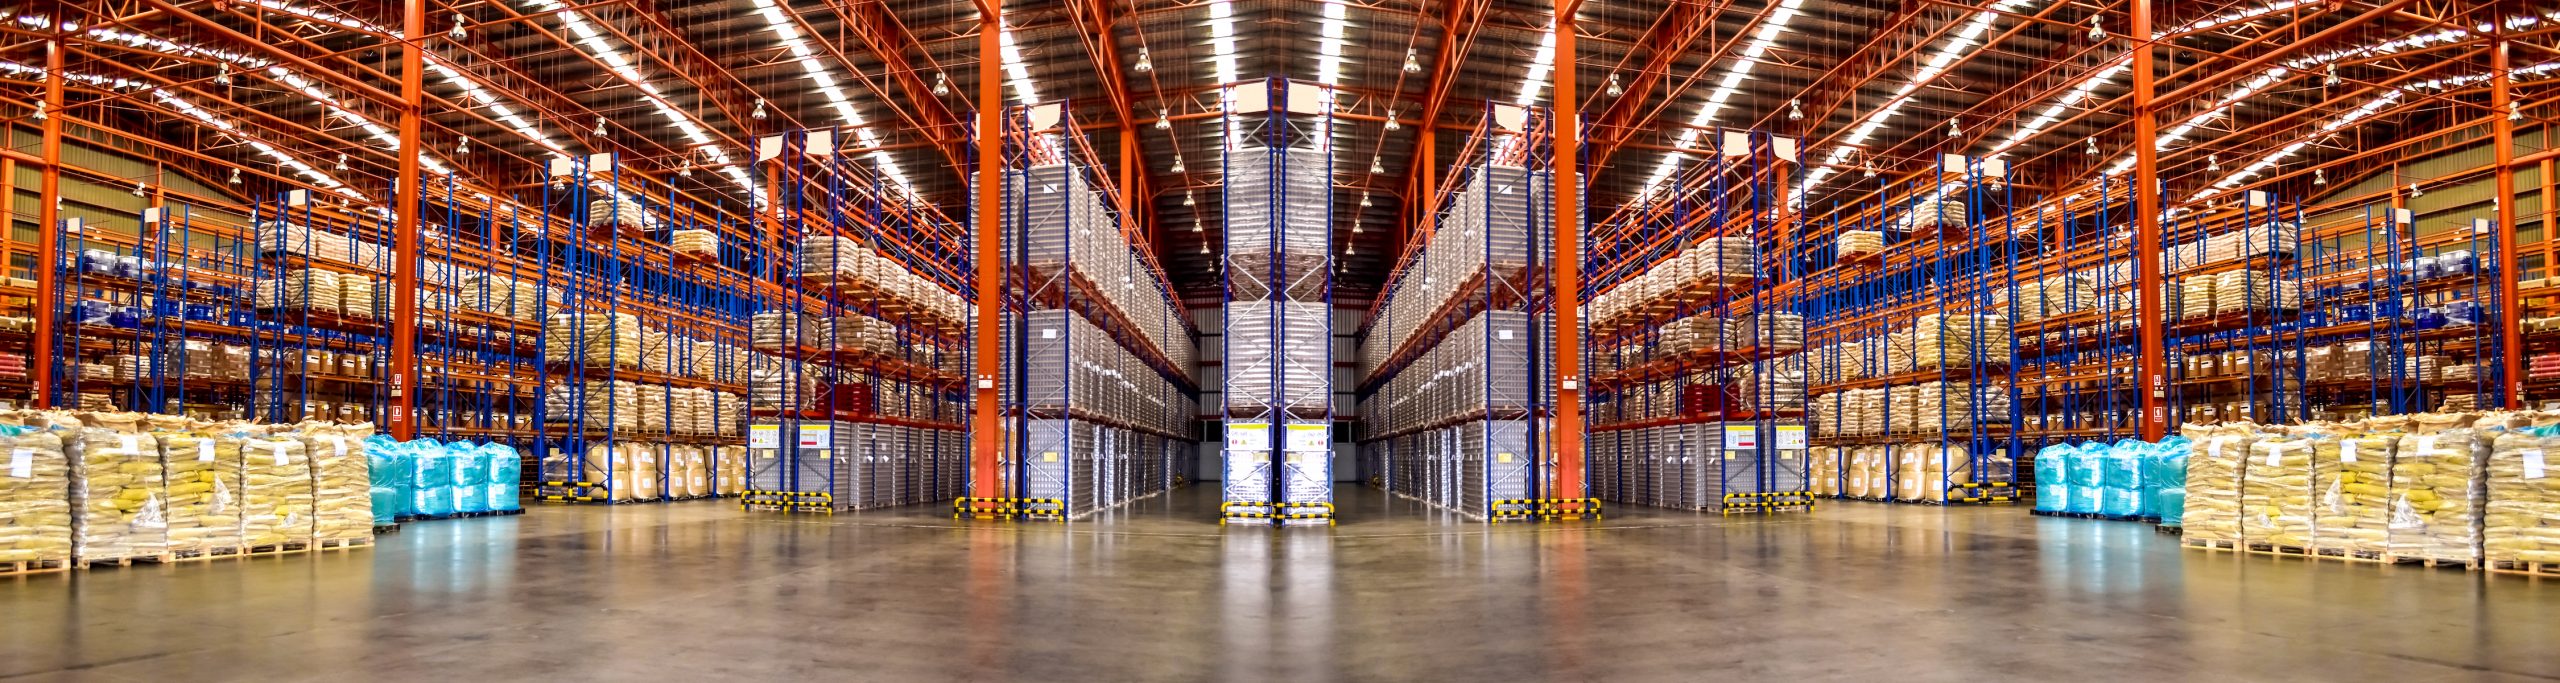 Huge distribution warehouse with high shelves. Low angle view.